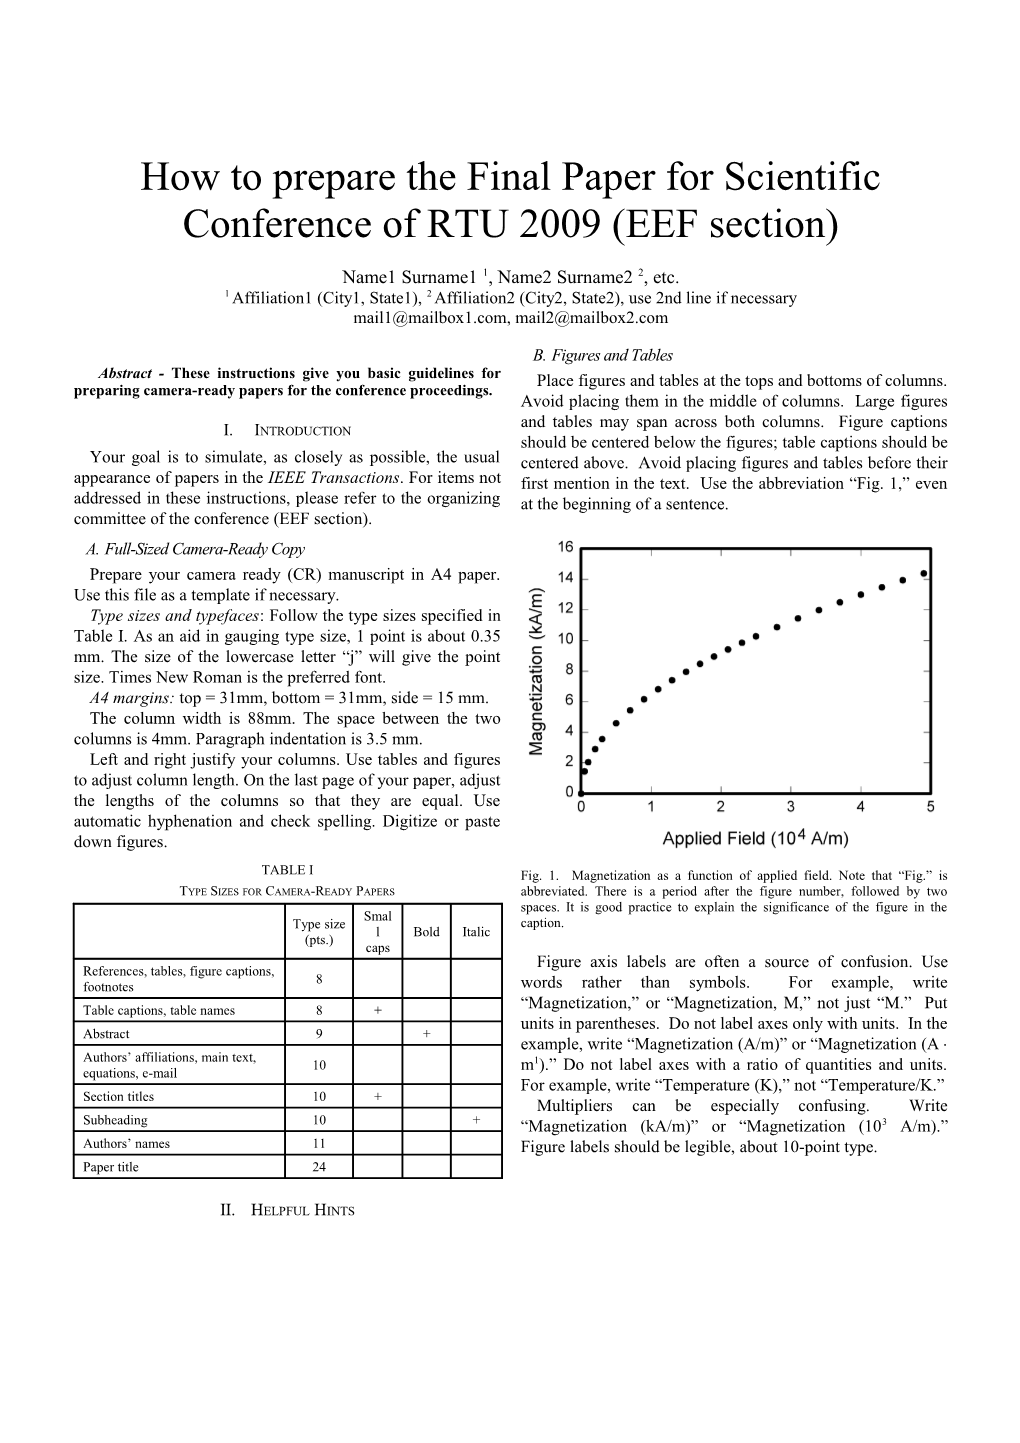 How to Prepare the Final Paper Forscientific Conference of RTU 2009 (EEF Section)